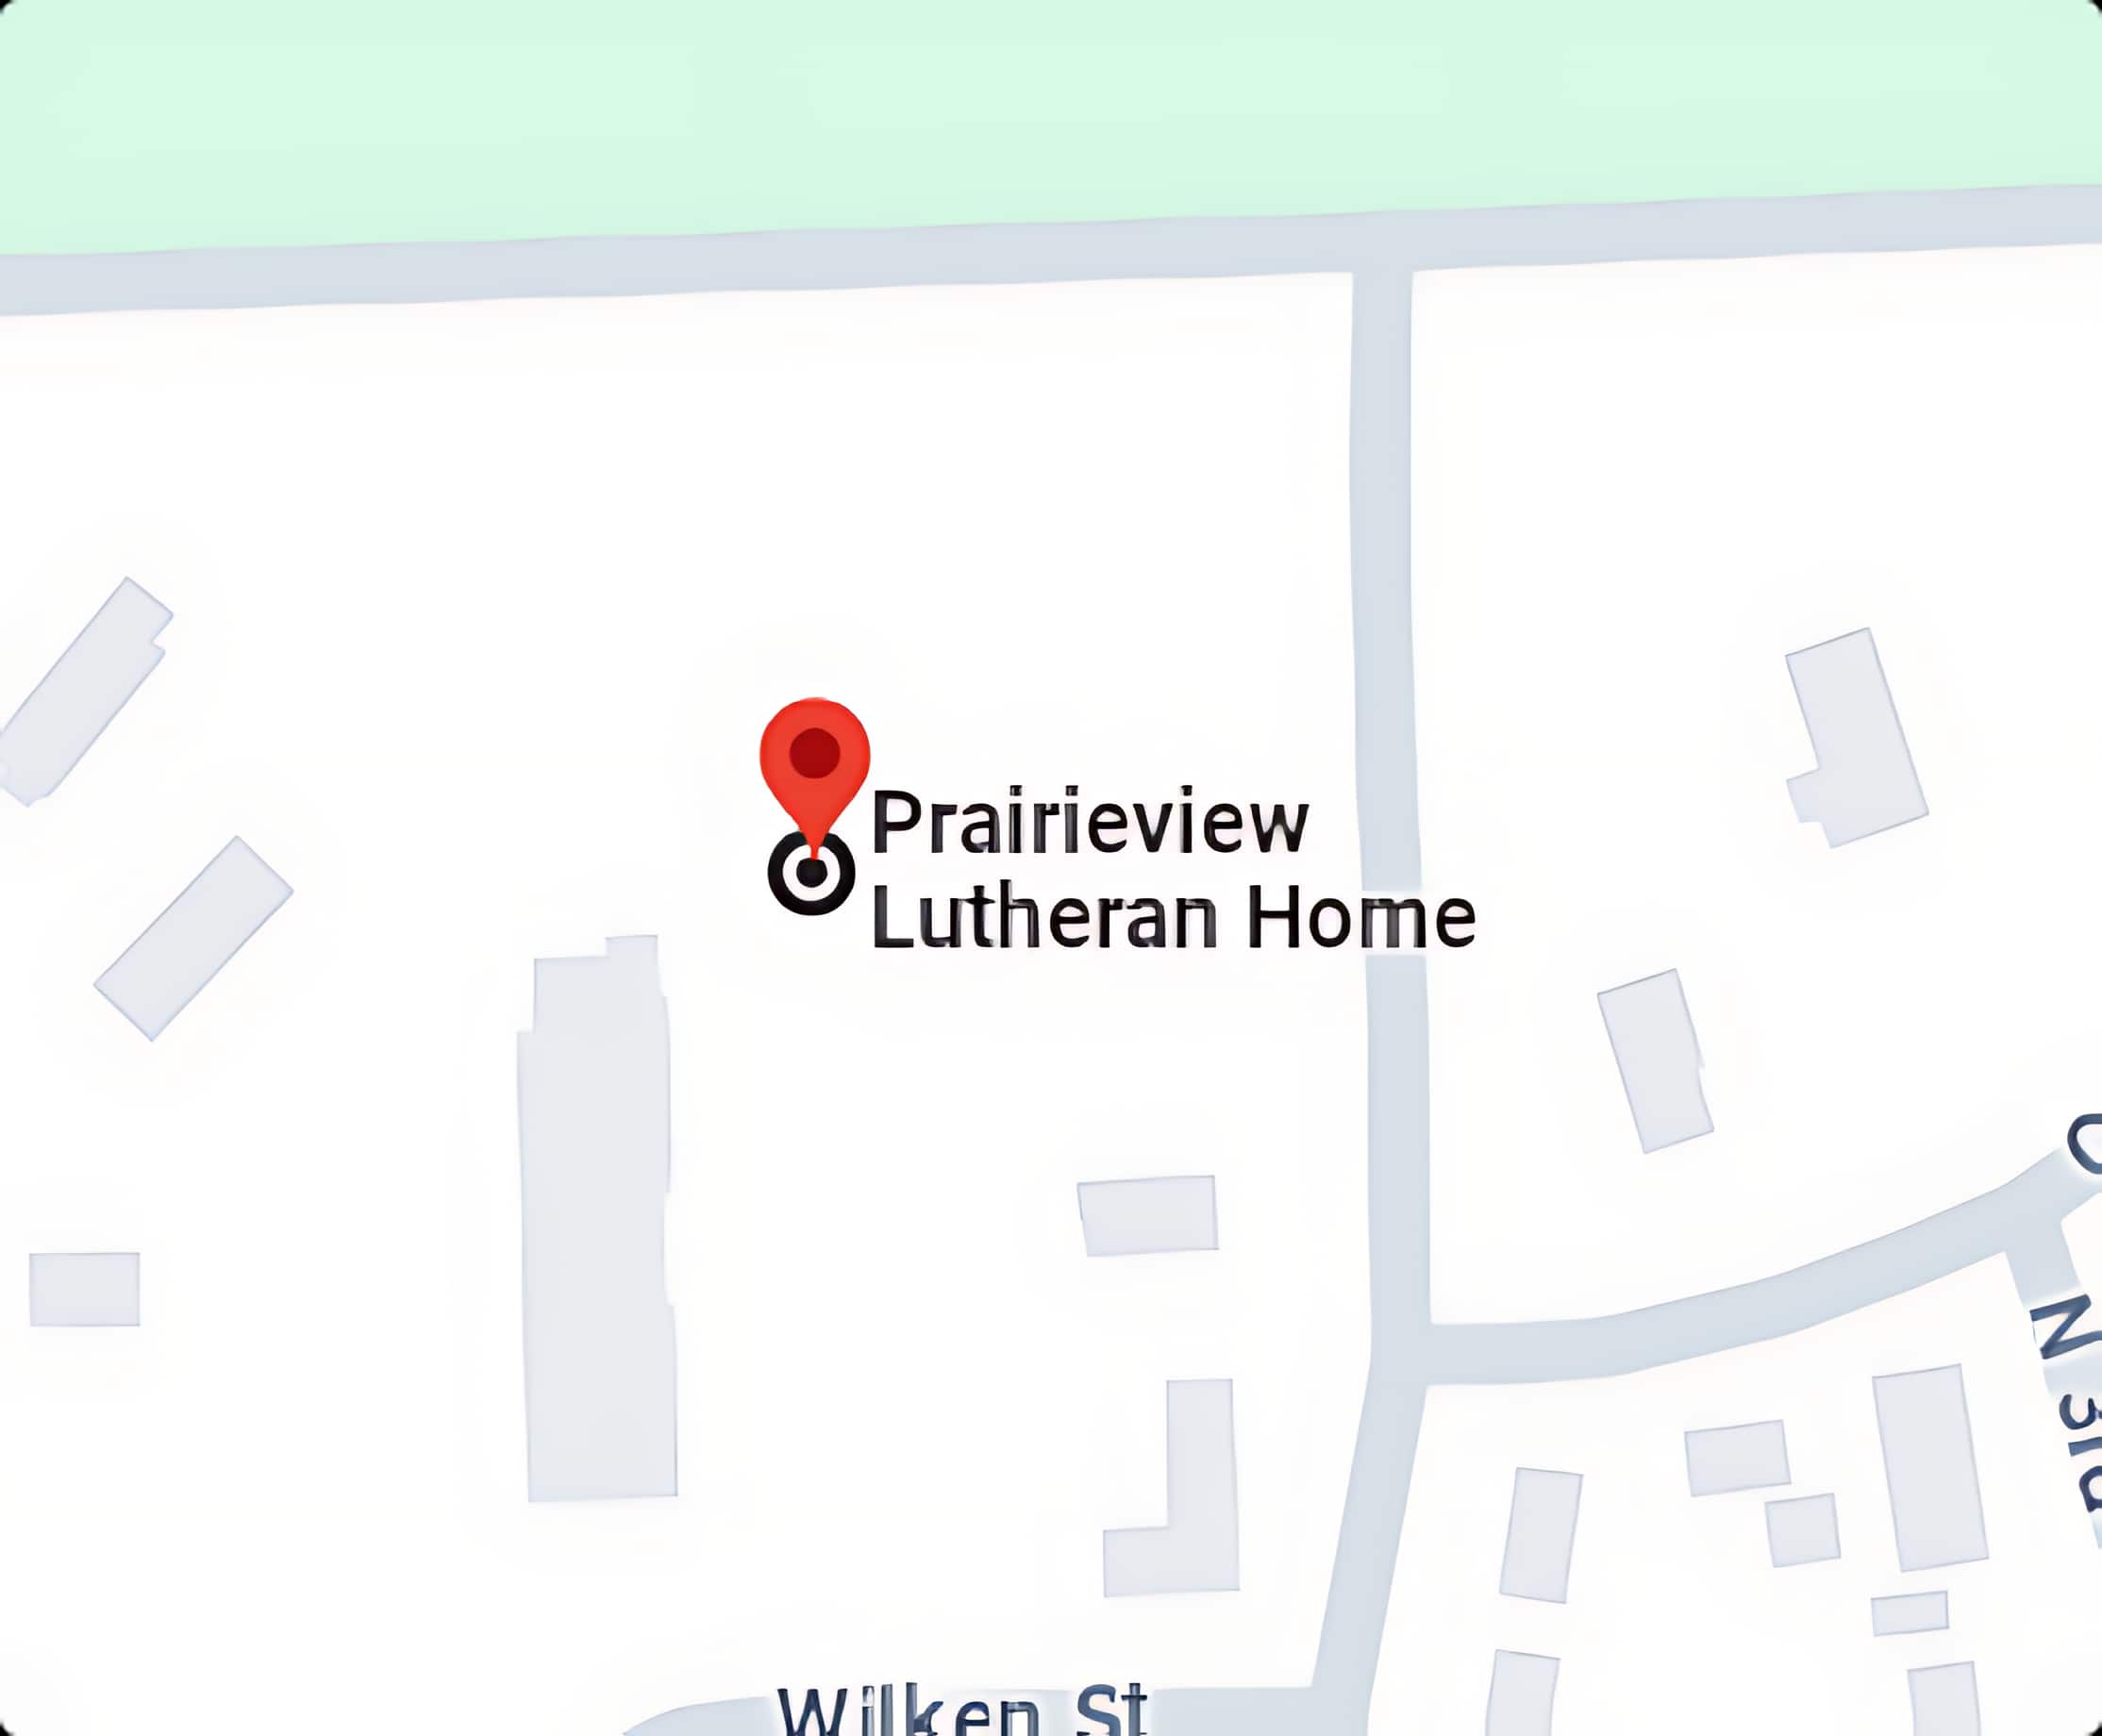 Map pin on Prairieview Lutheran Home location.